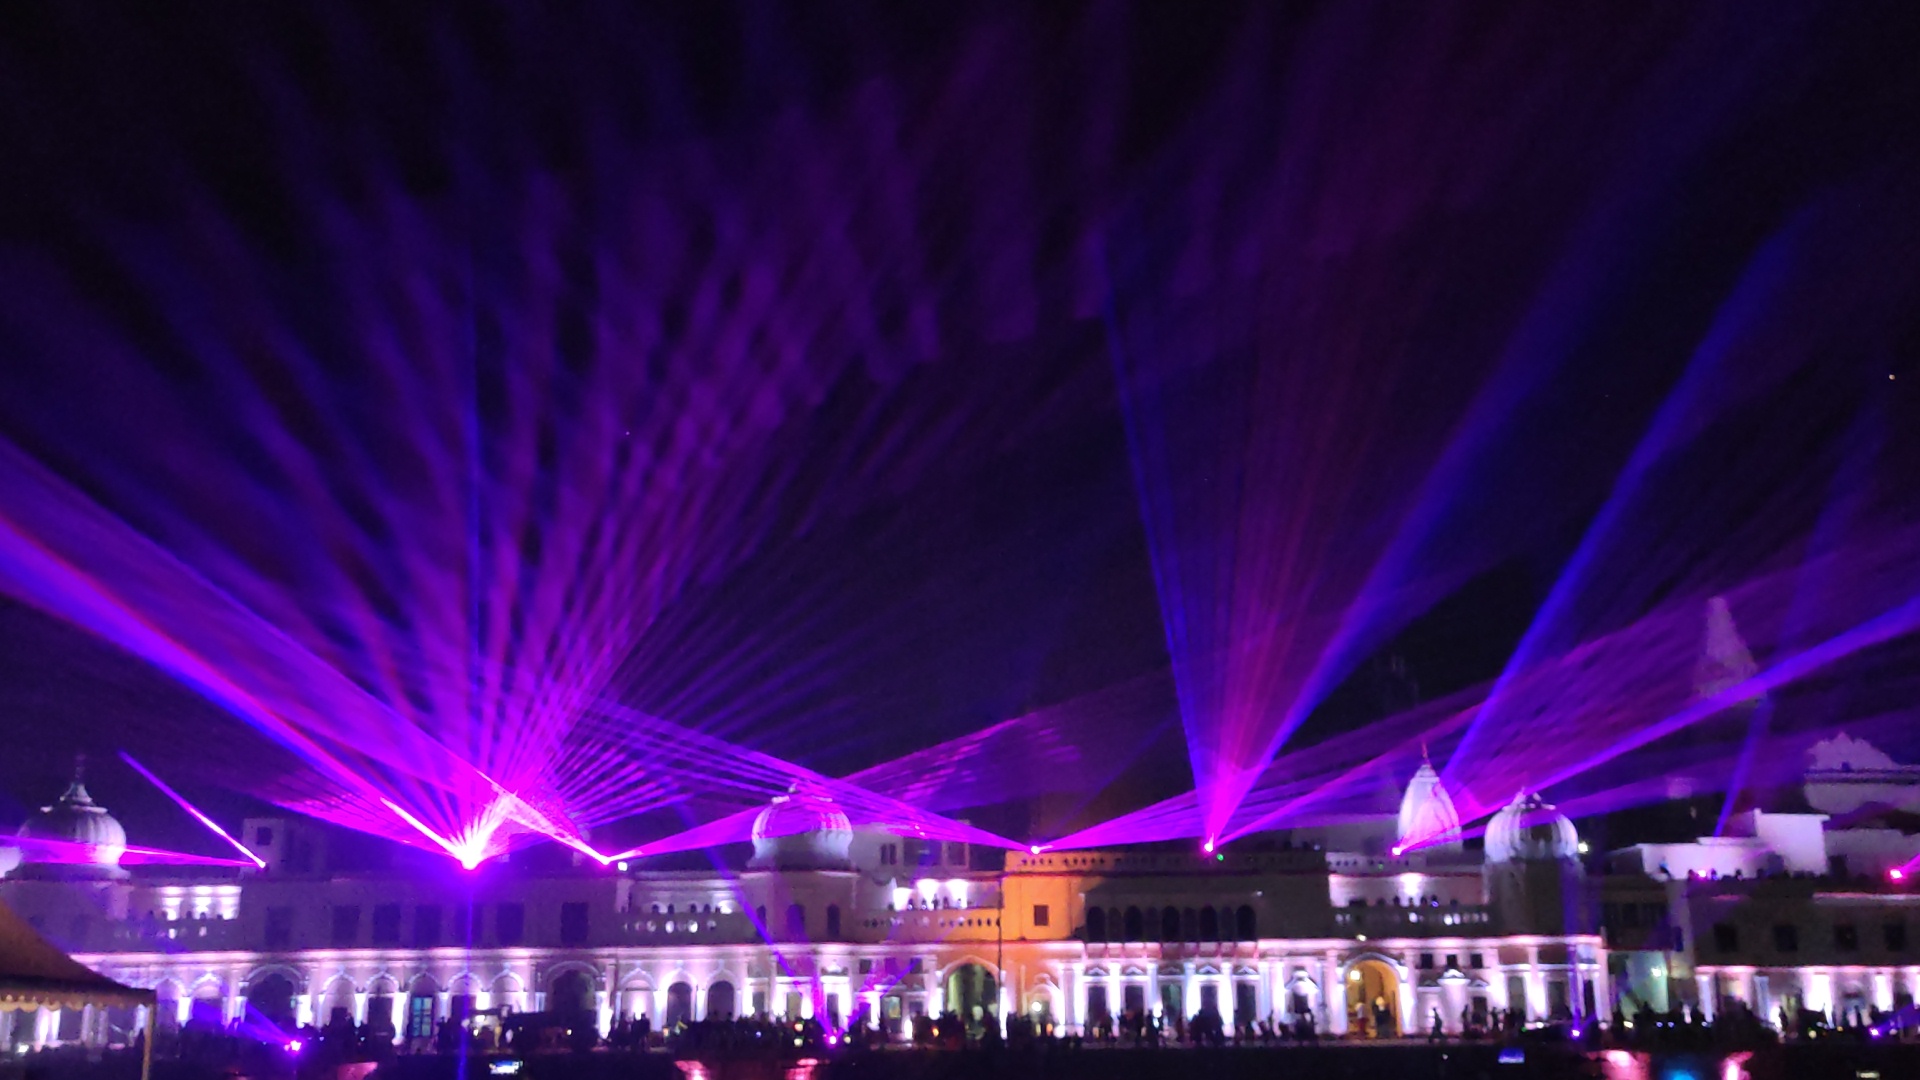 ayodhya lit up with colorful laser lights